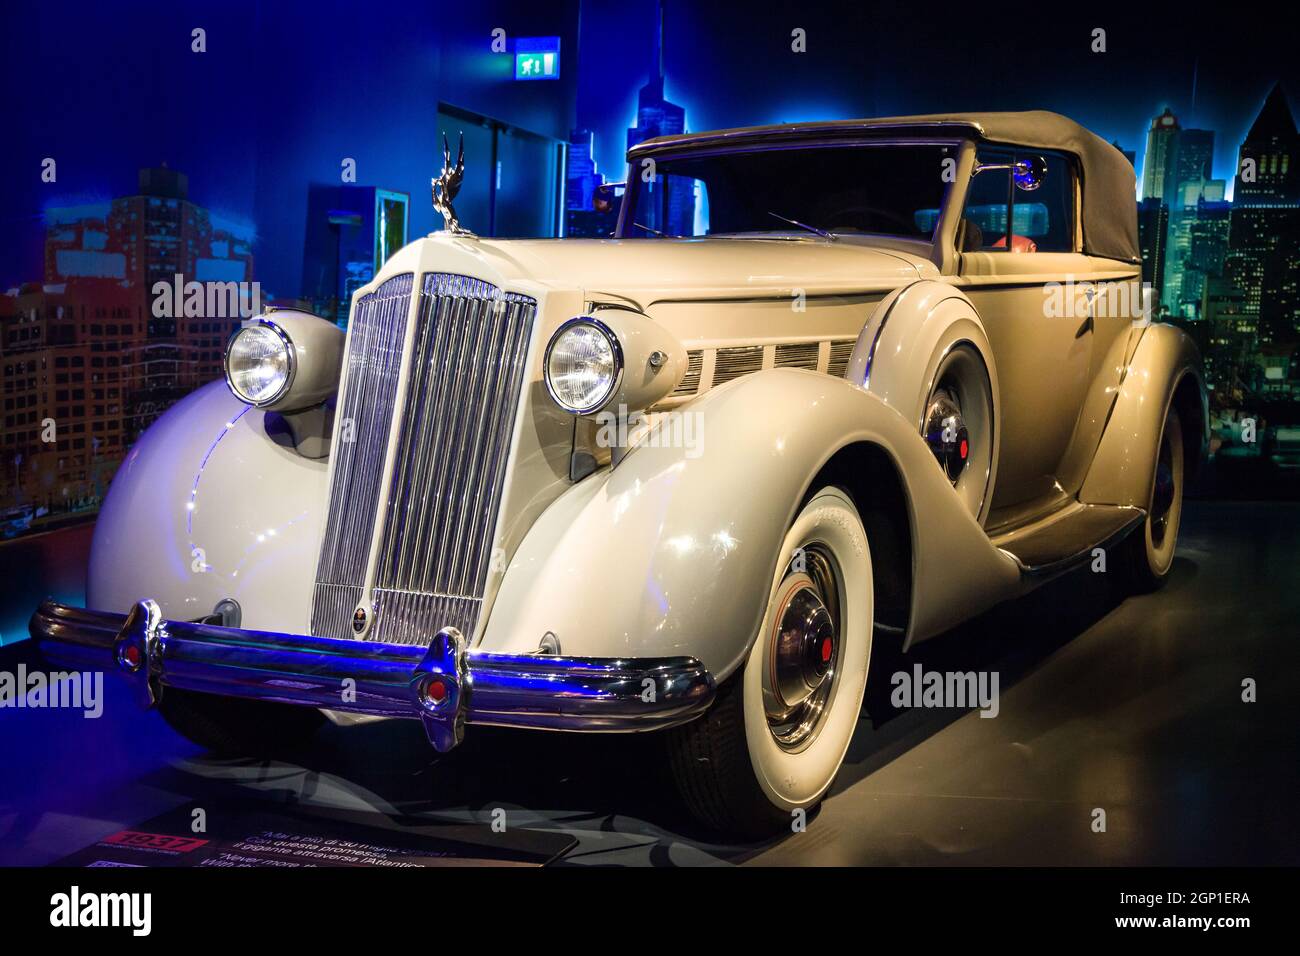 Torino, Italy - August 13, 2021: 1937 Packard Super-Eight 1501 showcased at the National Automobile Museum (MAUTO) in Torino, Italy. Stock Photo